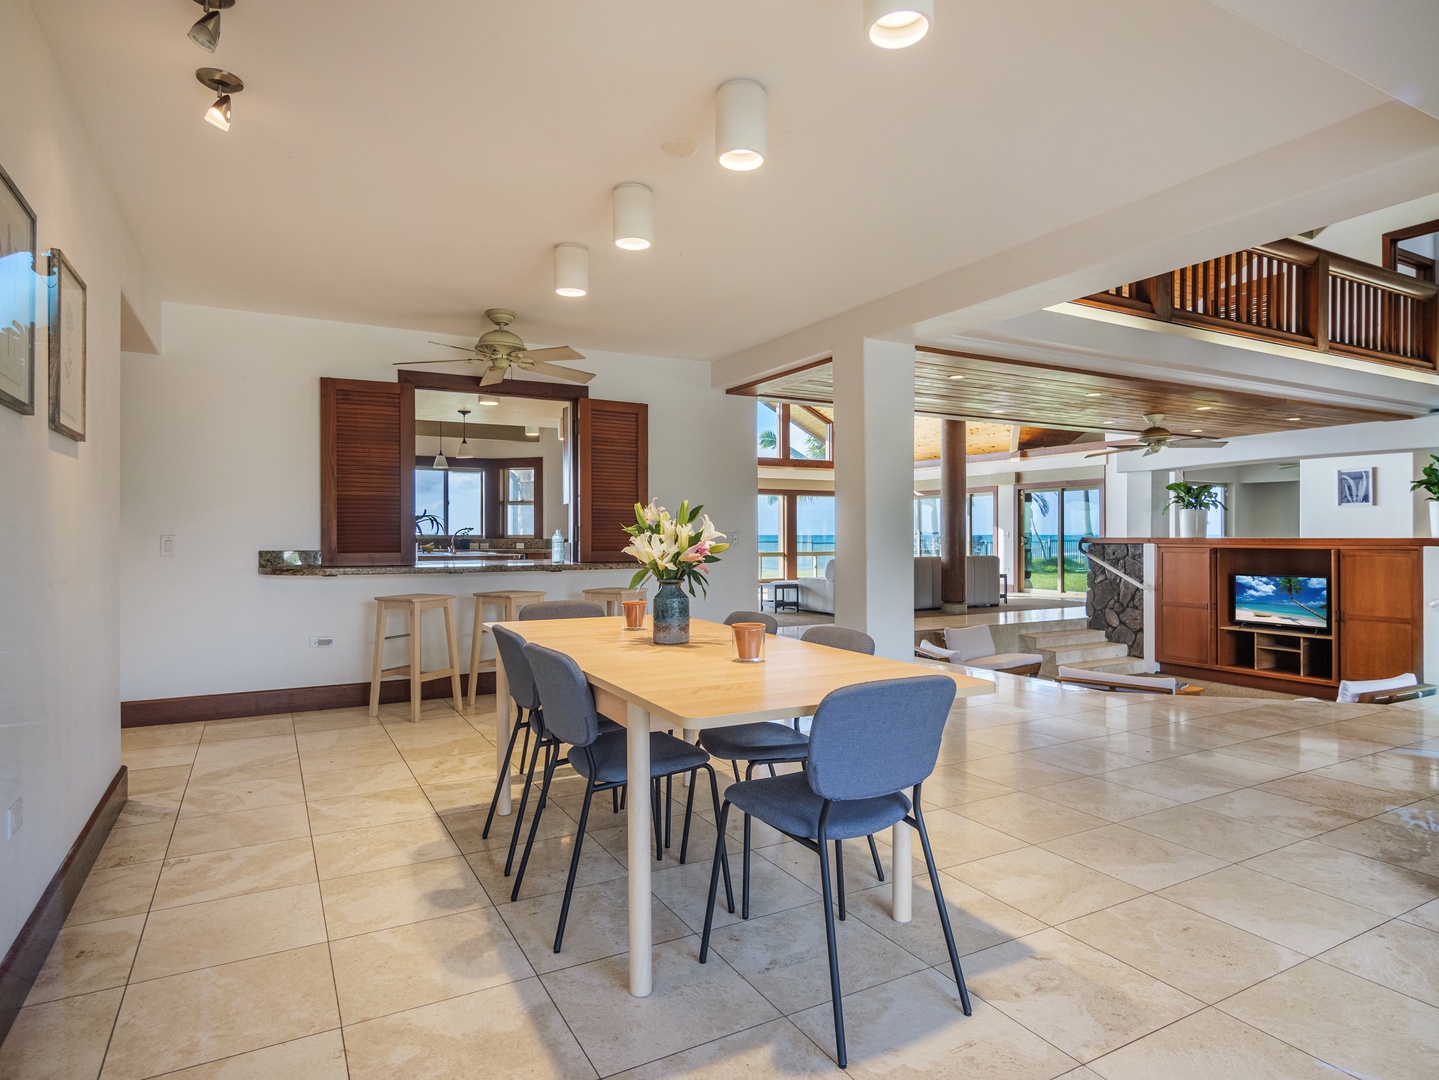 Waianae Vacation Rentals, Konishiki Beachhouse - Seamless flow from the dining to the living spaces, plenty of options to Gather.